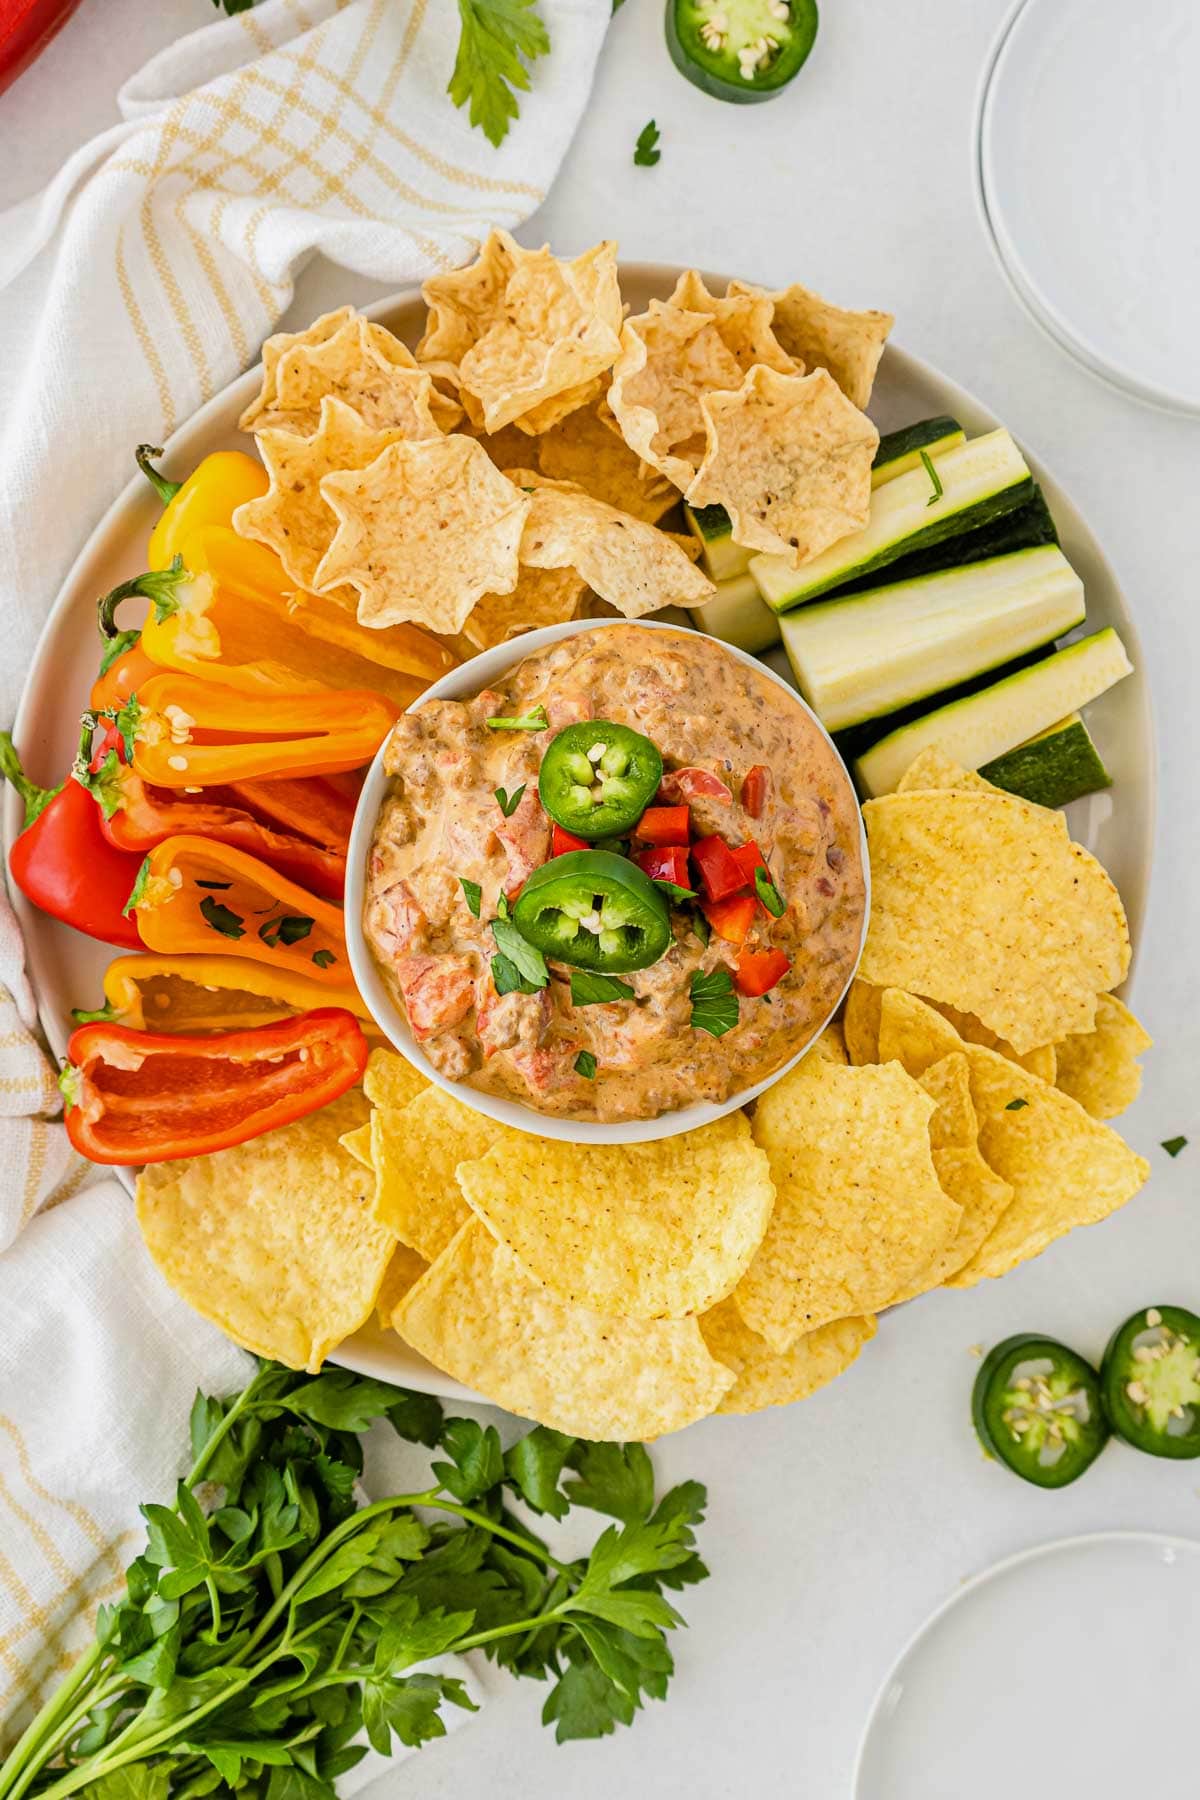 white bowl of rotel dip with meat surrounded by tortilla chips, sliced red peppers and zucchini